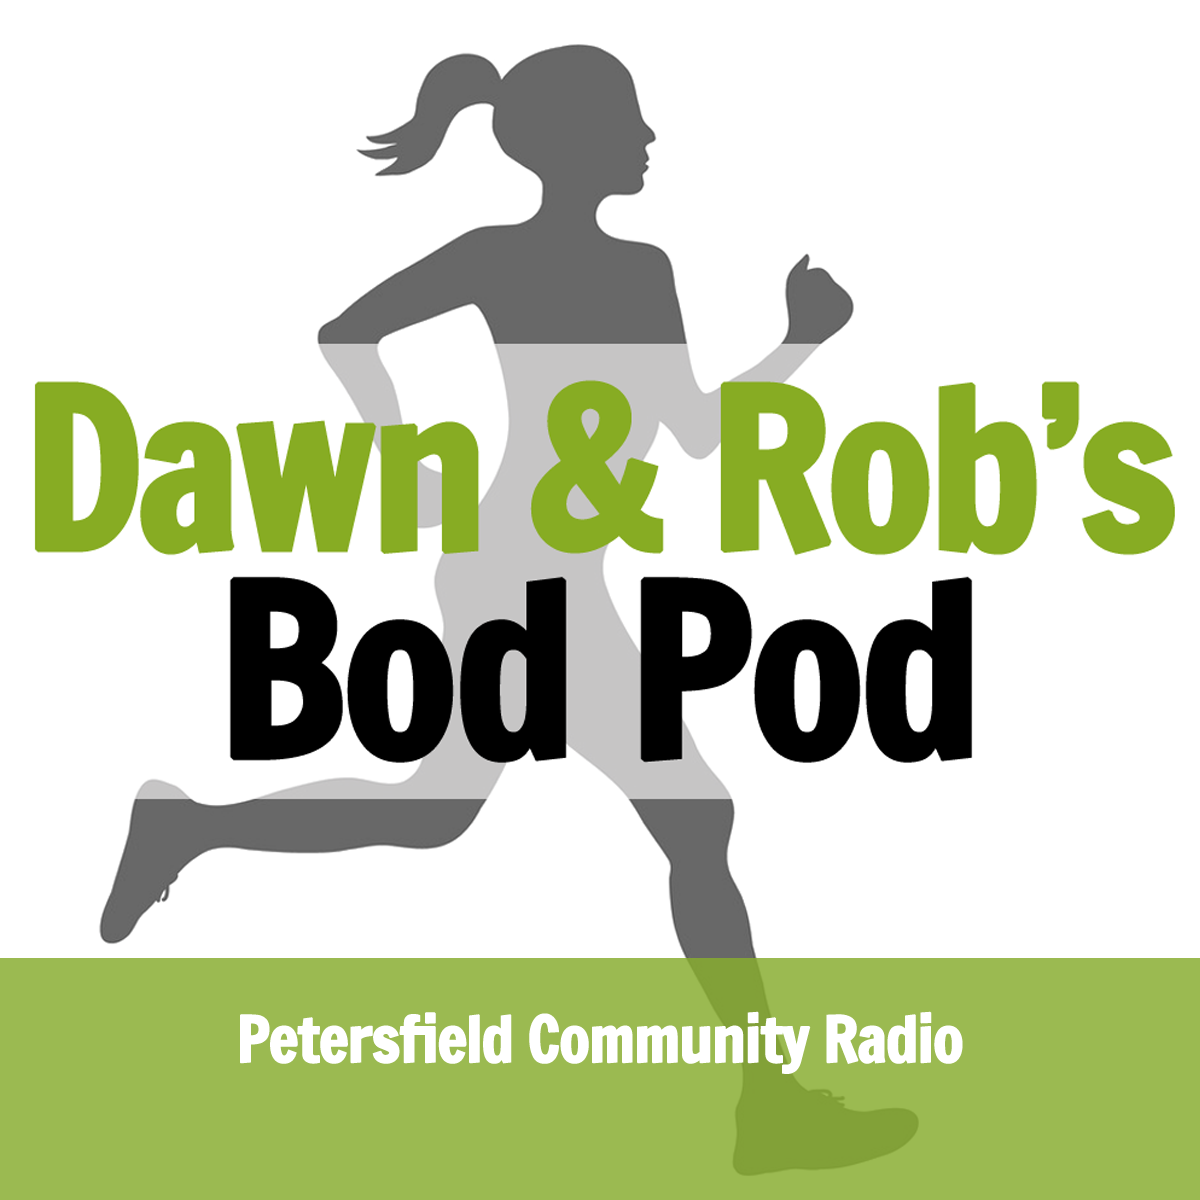 Dawn & Rob's Bod Pod. Episode 7 - your questions answered